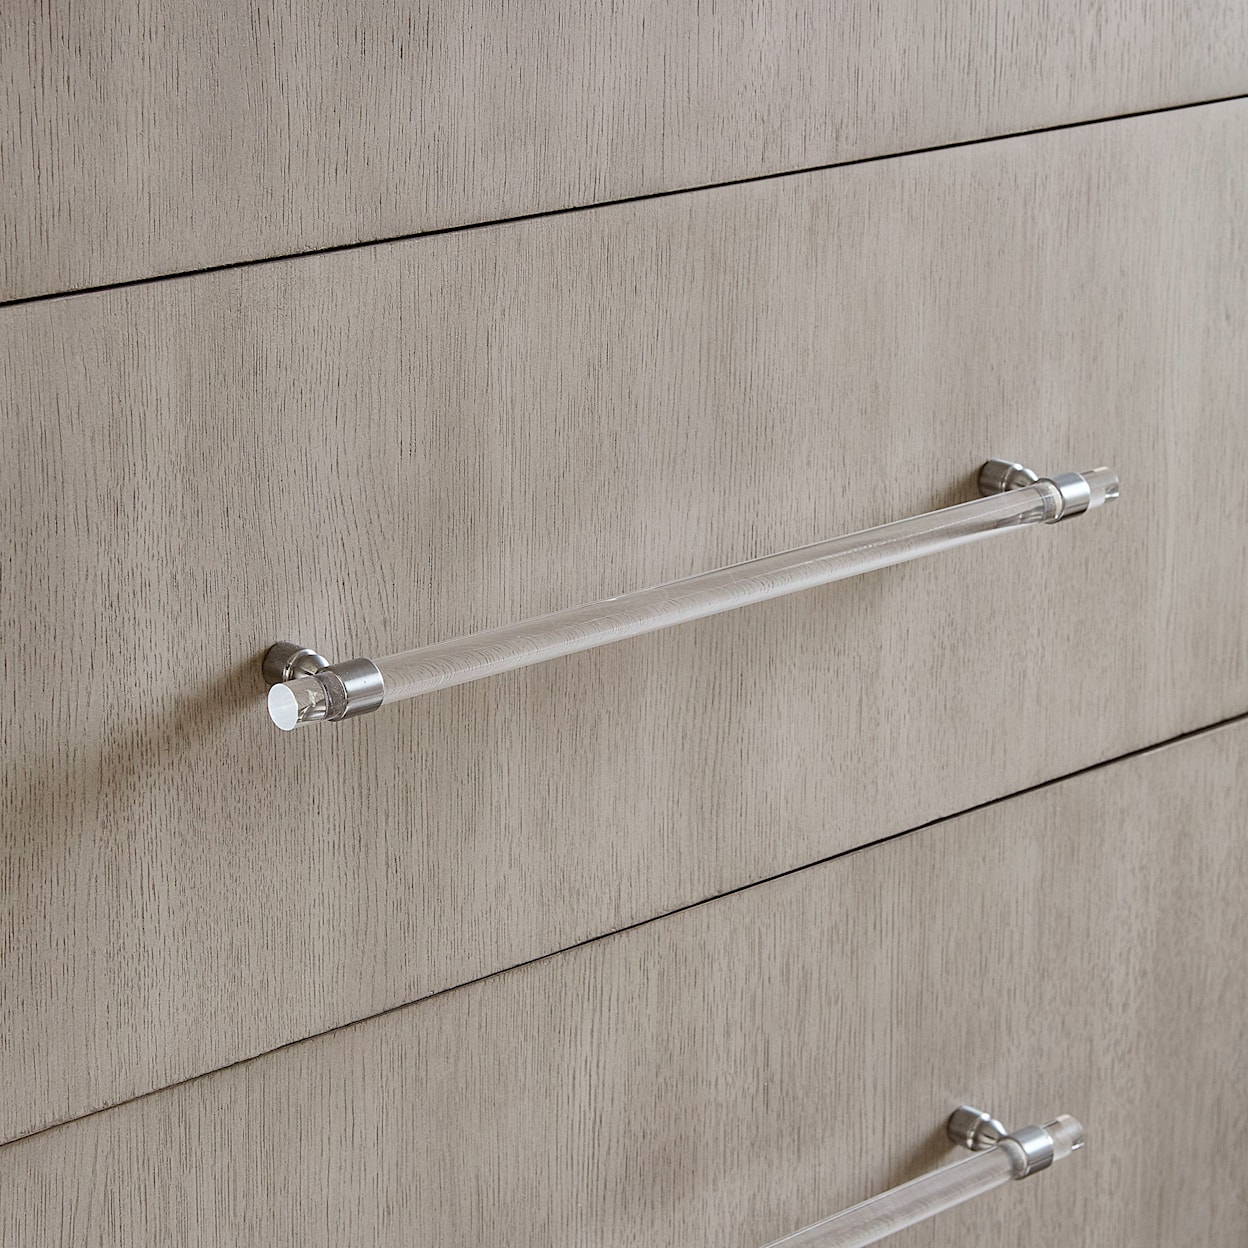 Modus International Argento Chest of Drawers